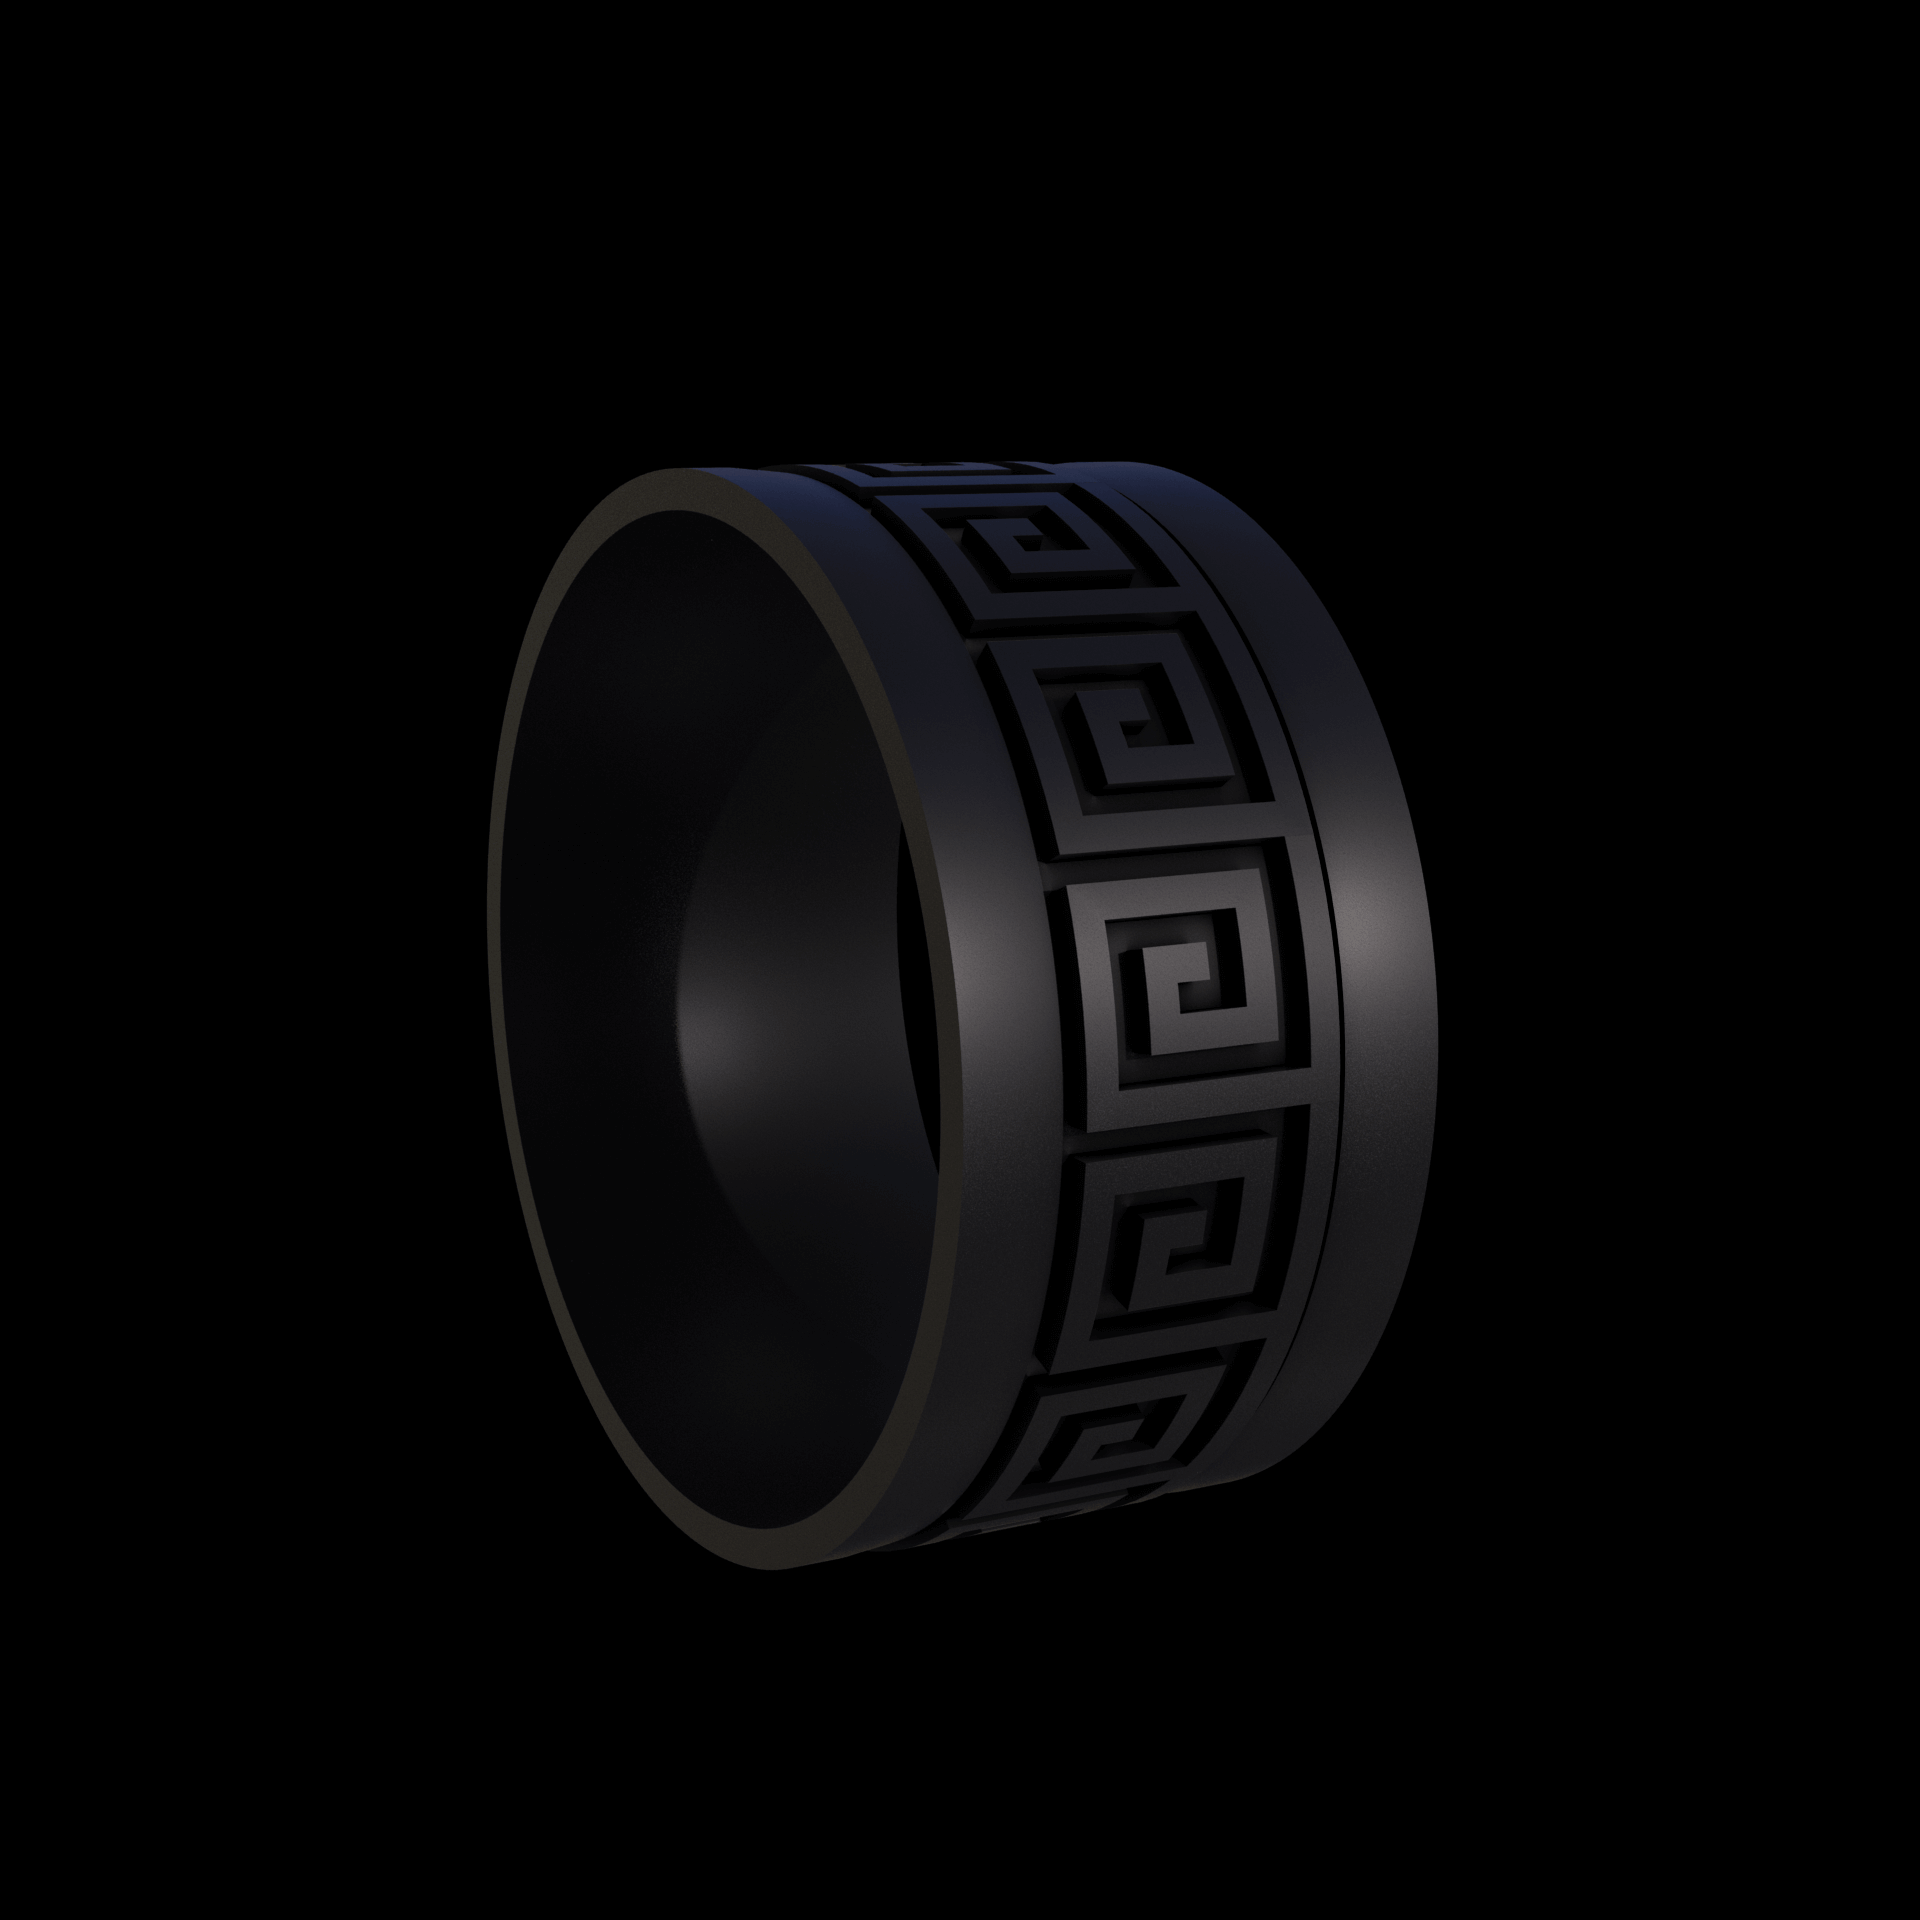 Bronze infused 420 stainless steel, manufactured using 3D printing, treated for a dark grey matte surface finish, with visible print lines.